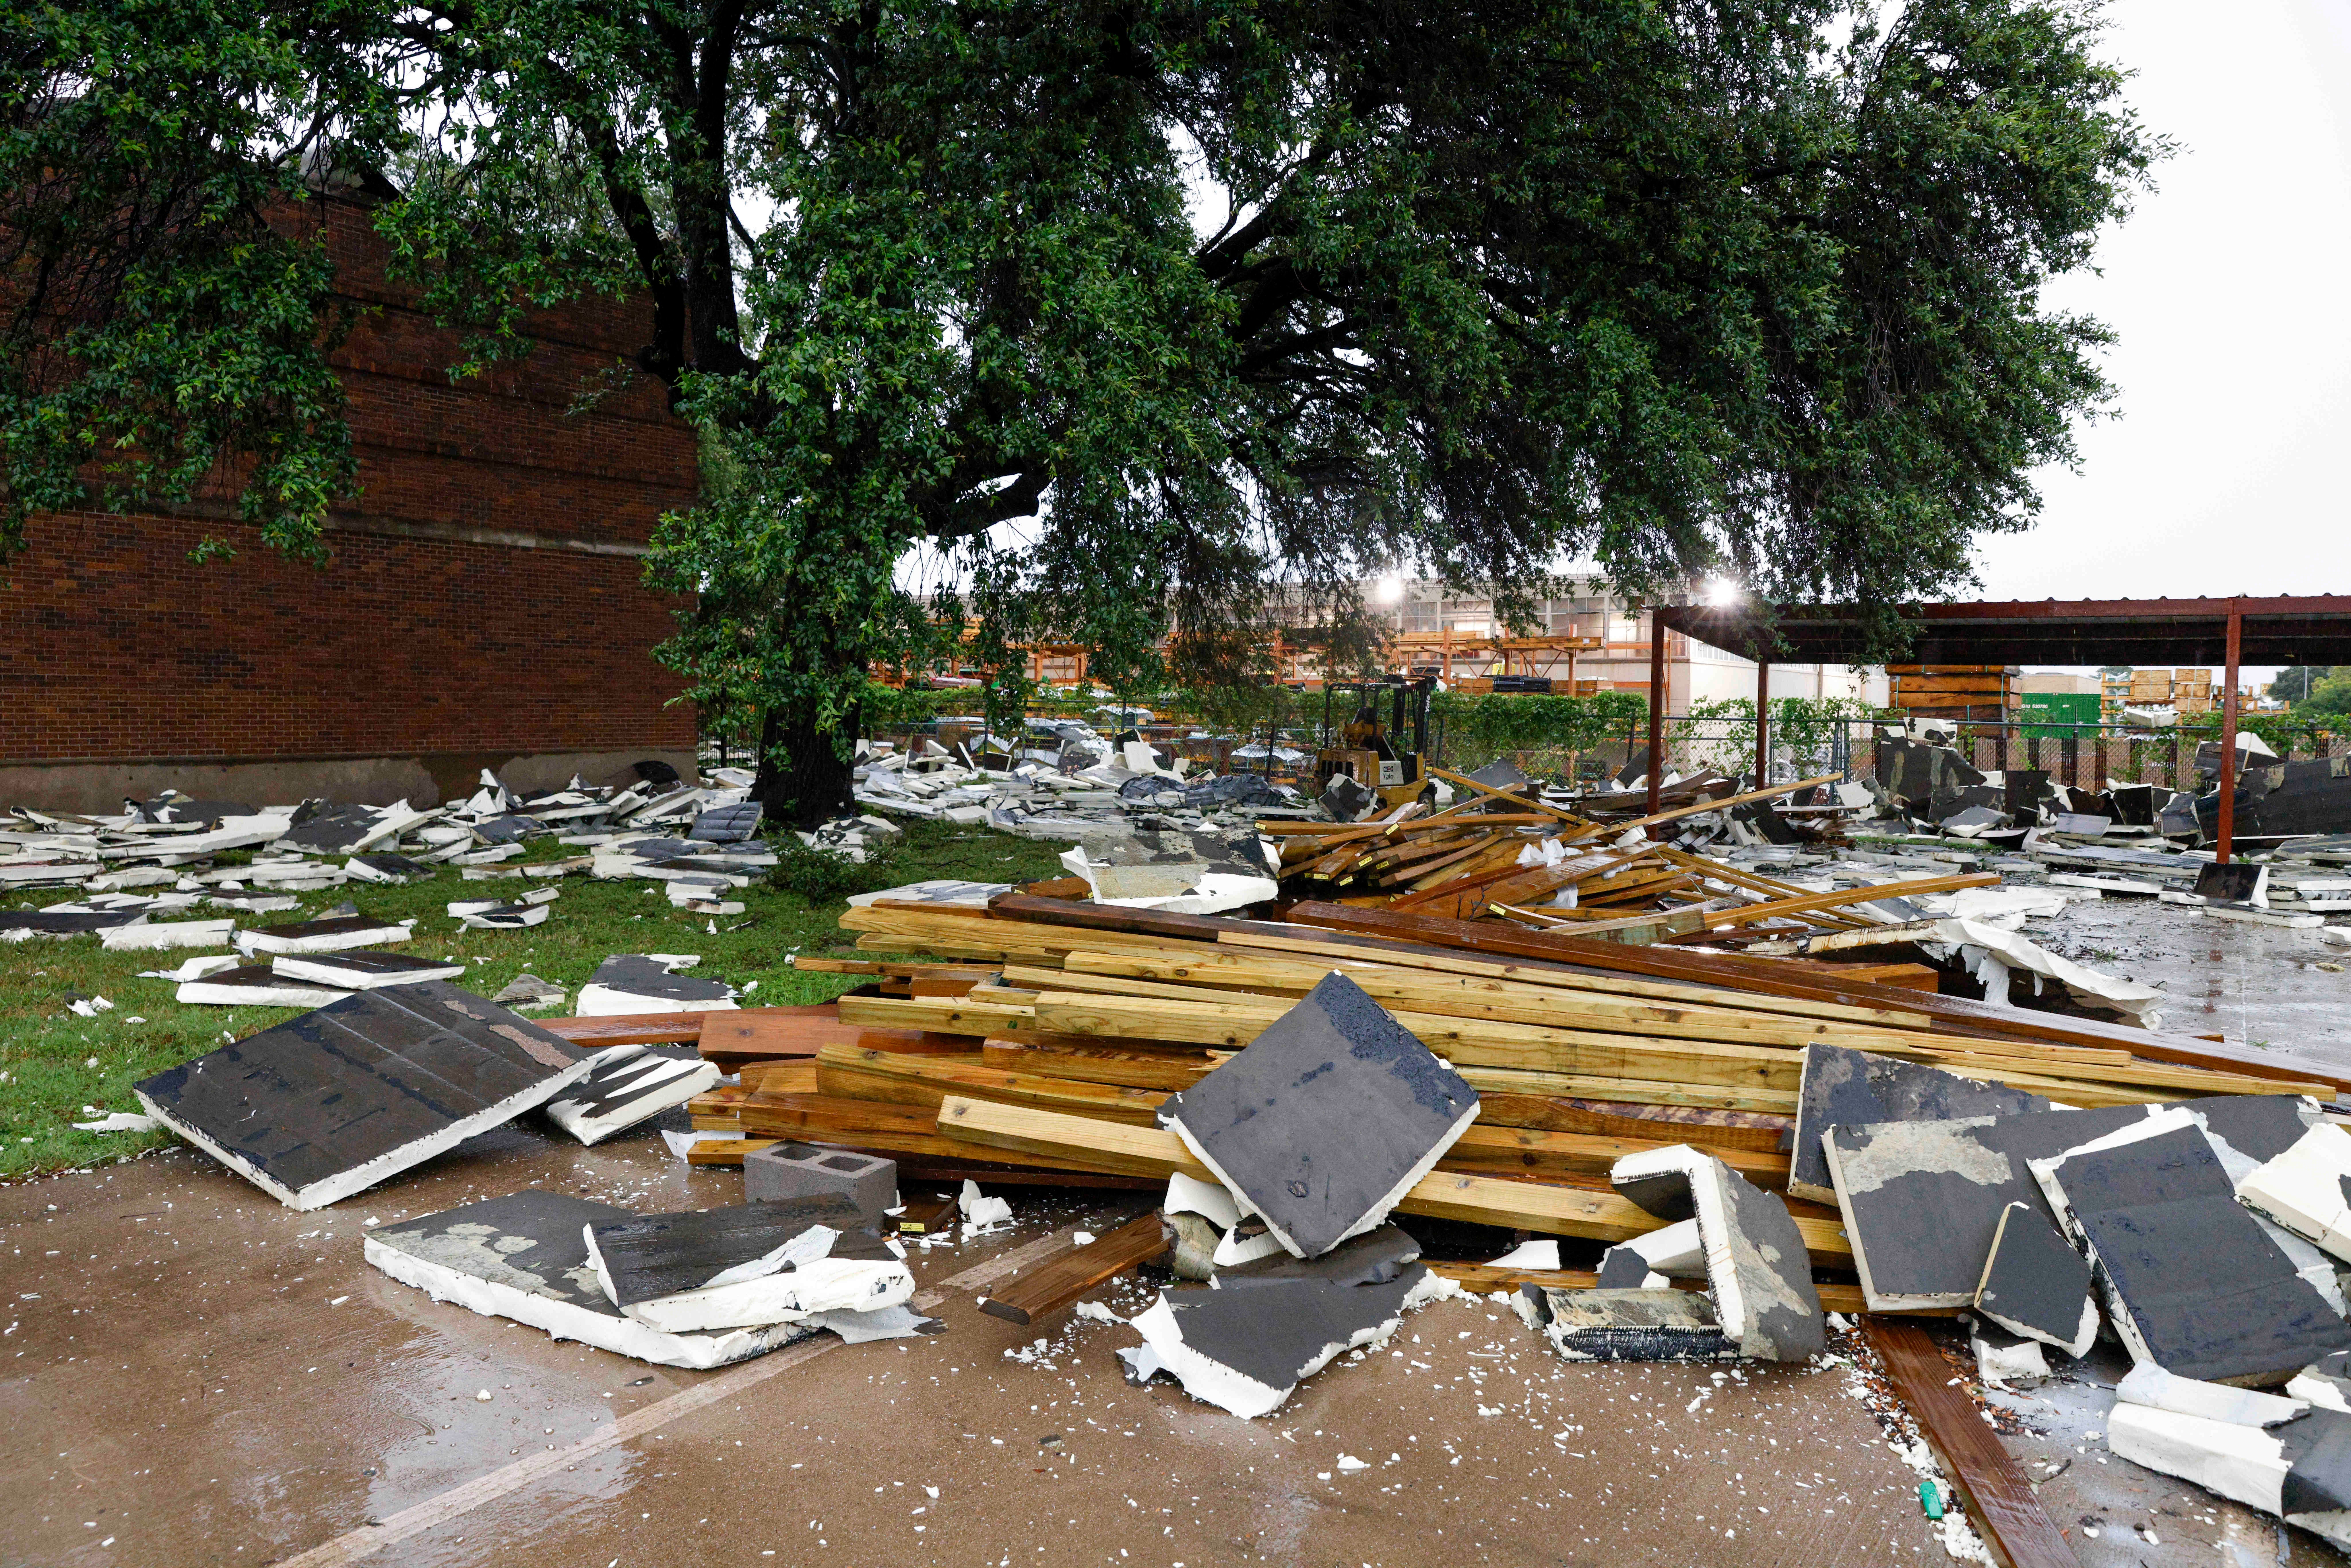 Rainbow Hardware store pictured in Dallas, Texas after a destructive thunderstorm rolled through the region. More than 1 million people across the state are without power